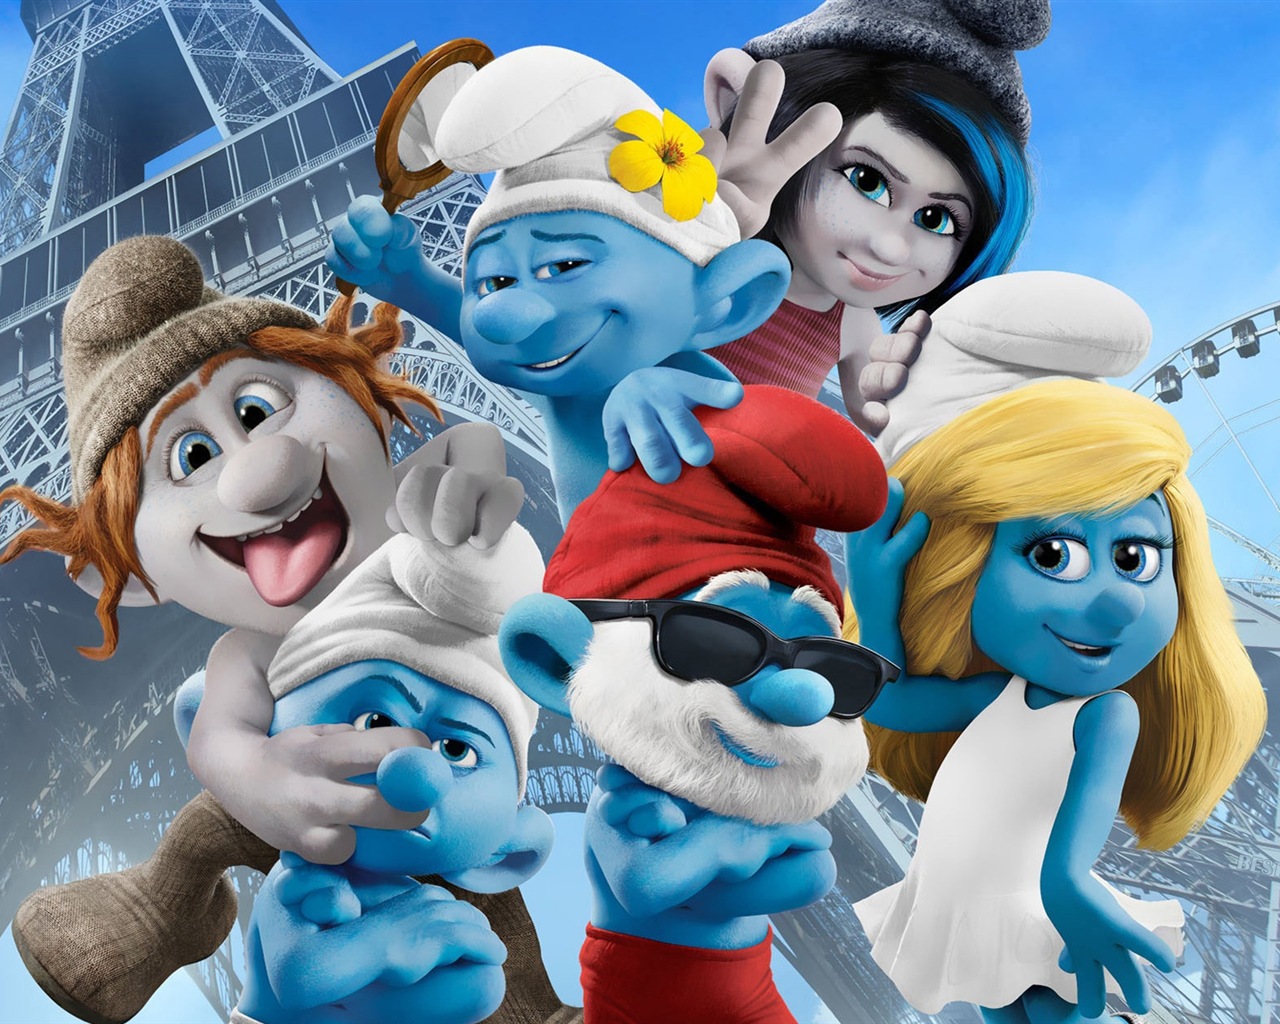 The Smurfs 2 HD movie wallpapers #7 - 1280x1024